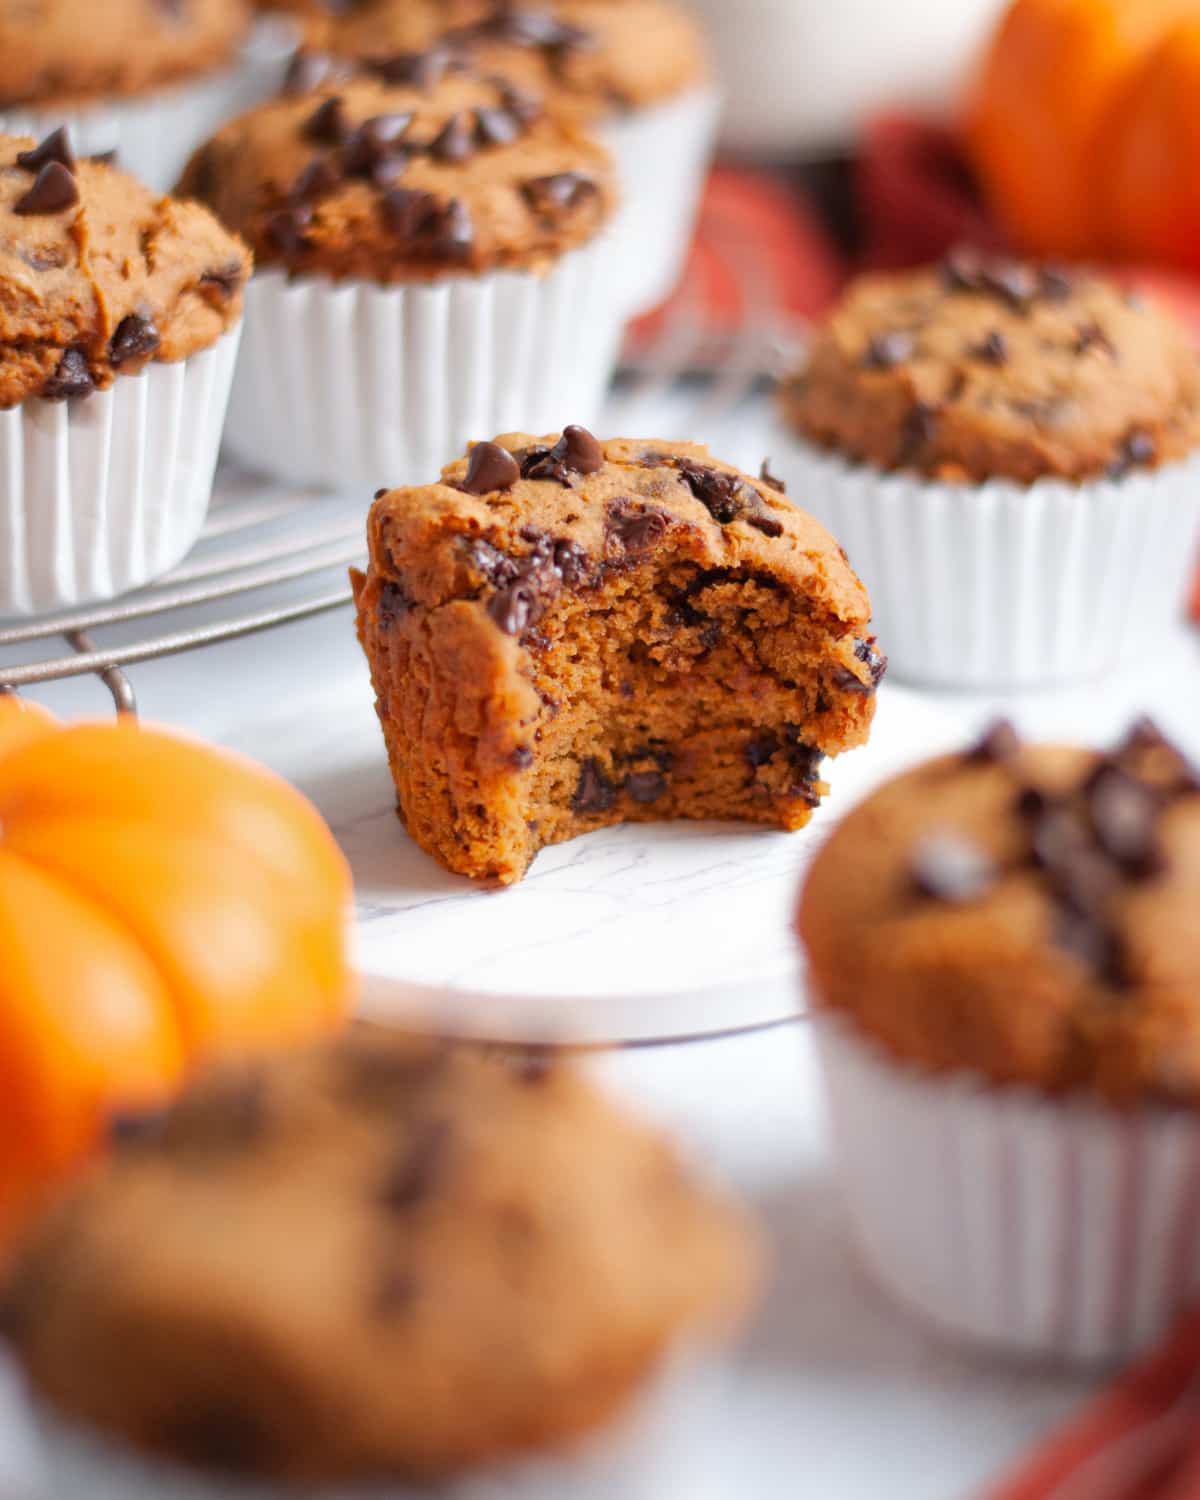 a pumpkin chocolate chip muffin with a bite out of it sitting on a white coaster. The muffin is surrounded by additional 3 ingredient pumpkin muffins, mini pumpkins, and an orange linen.